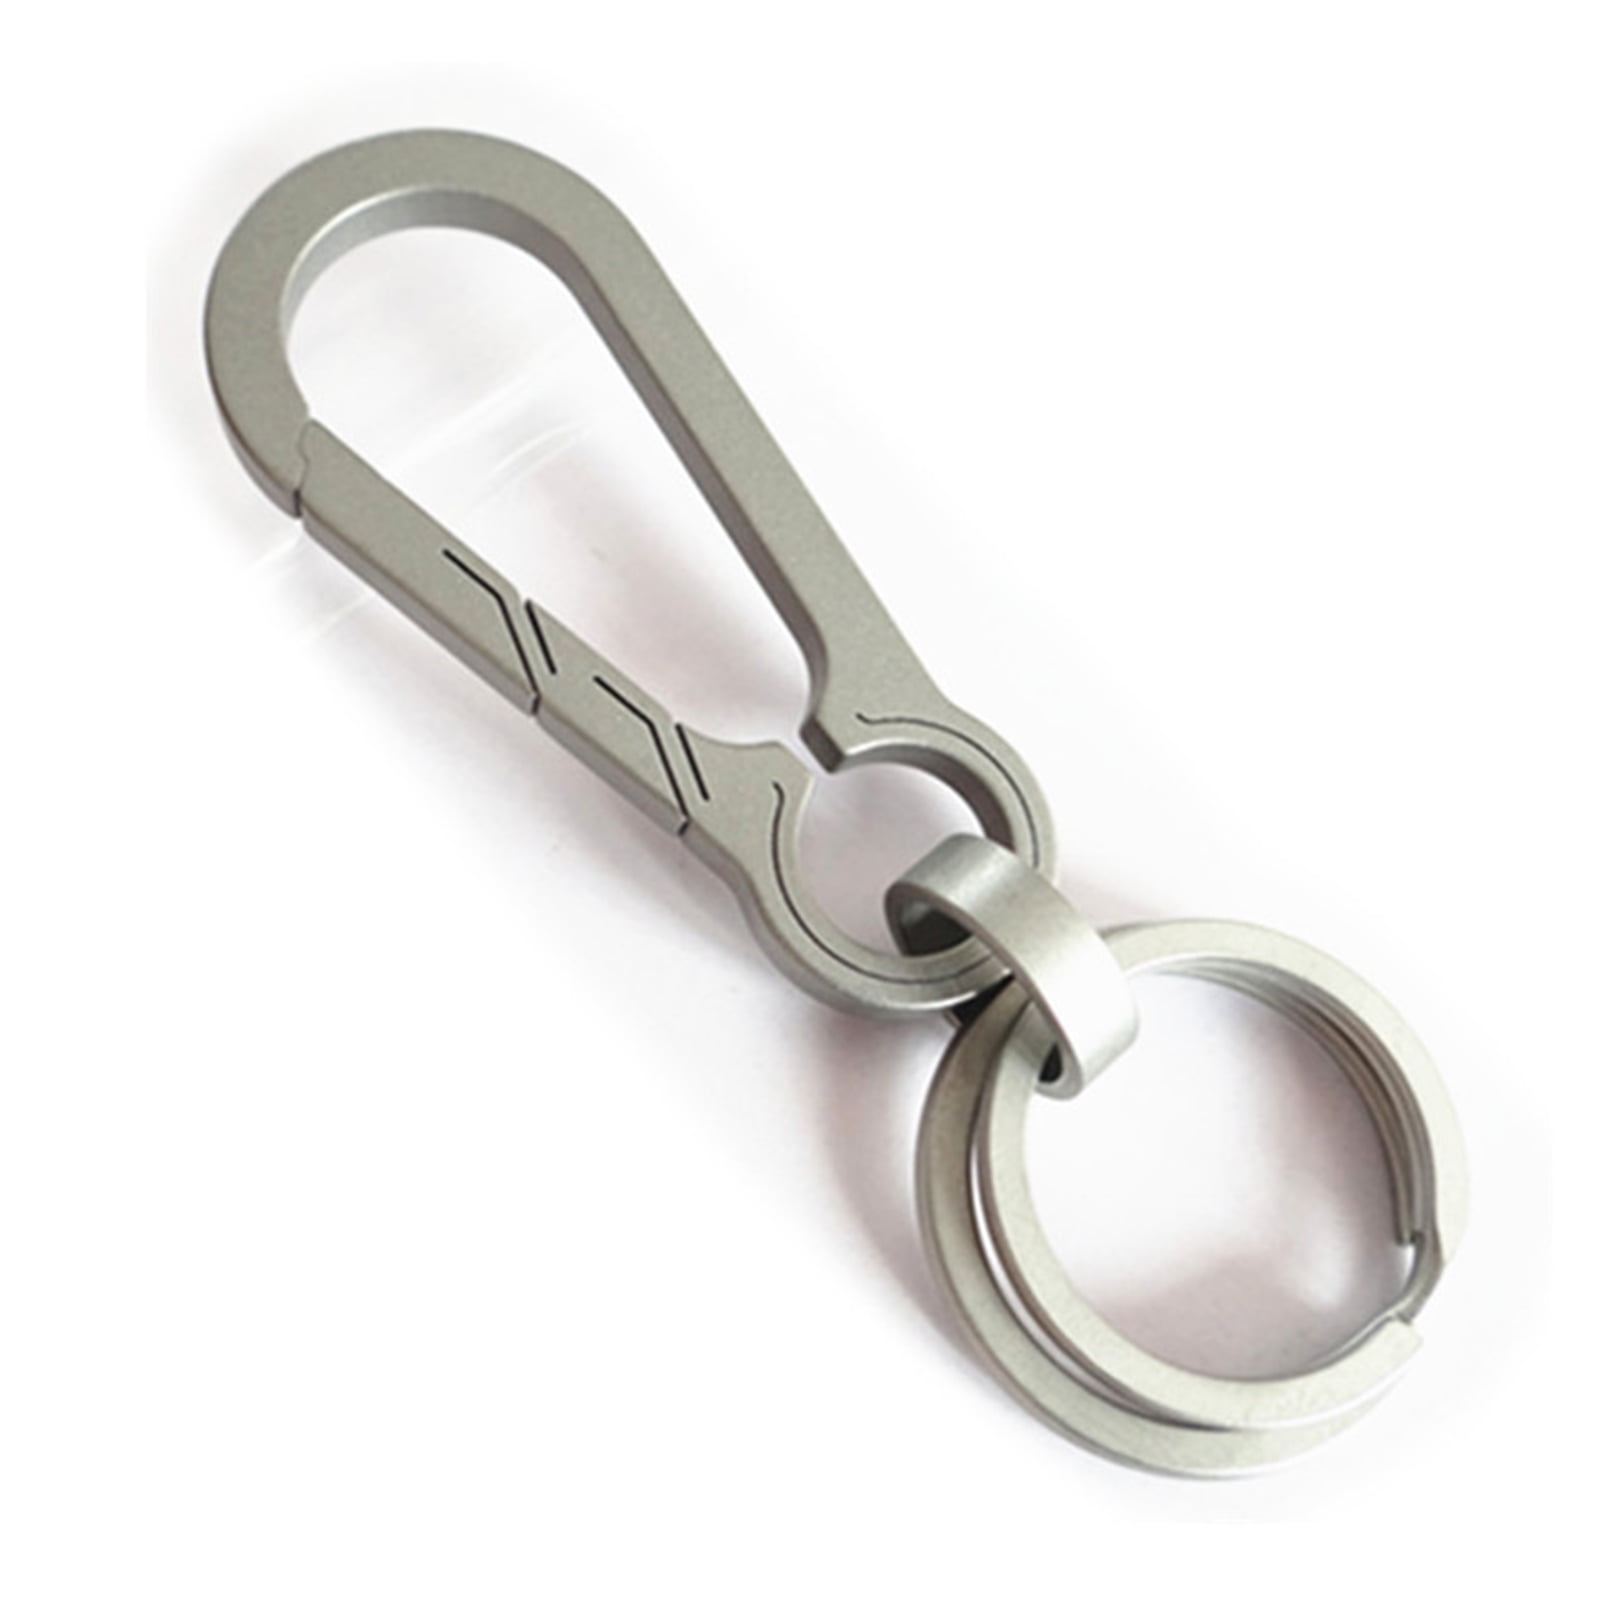 TISUR Titanium Carabiner Keychain Clip+Key Rings for Keychains